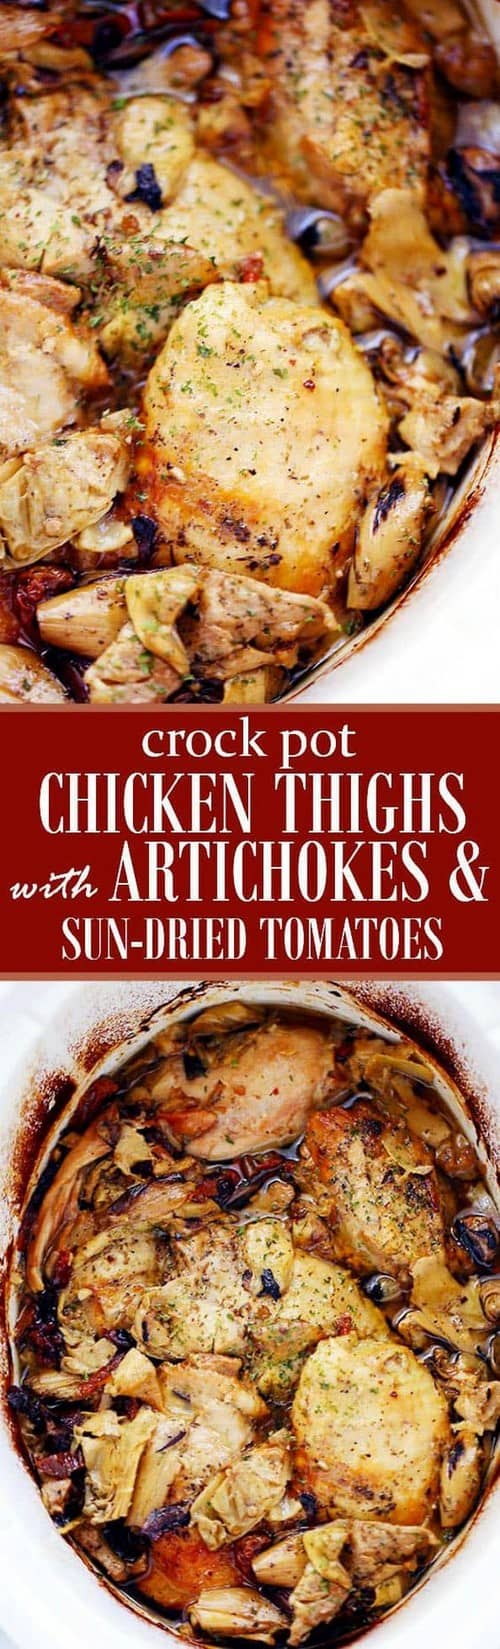 Mediterranean Crock-Pot Chicken Thighs with Artichokes and Sun-Dried Tomatoes